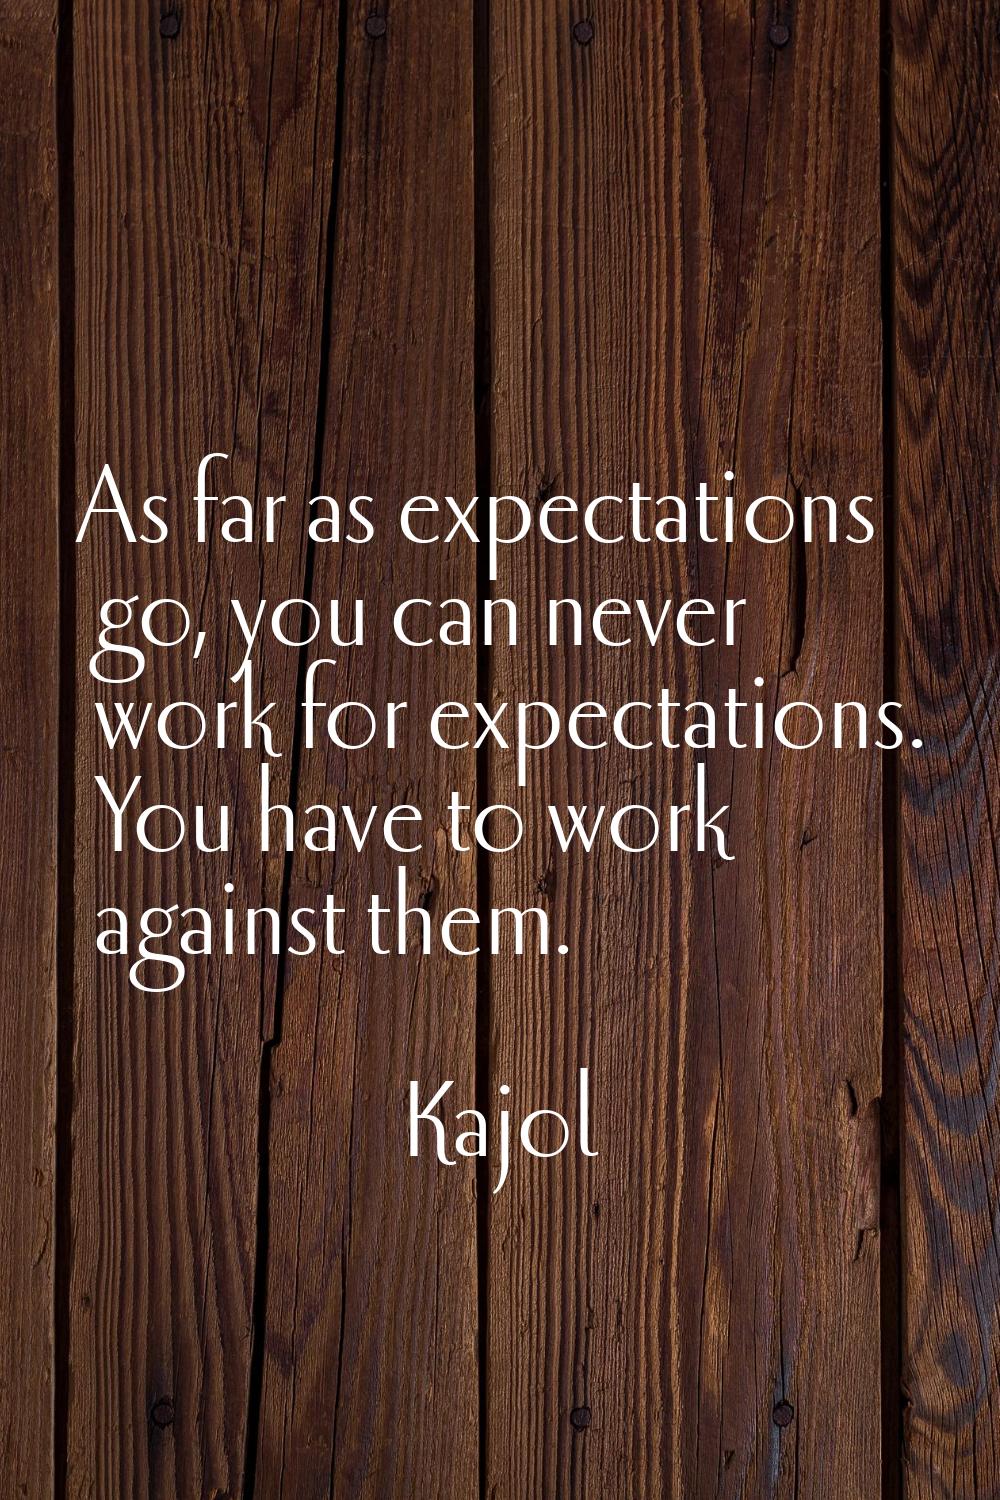 As far as expectations go, you can never work for expectations. You have to work against them.